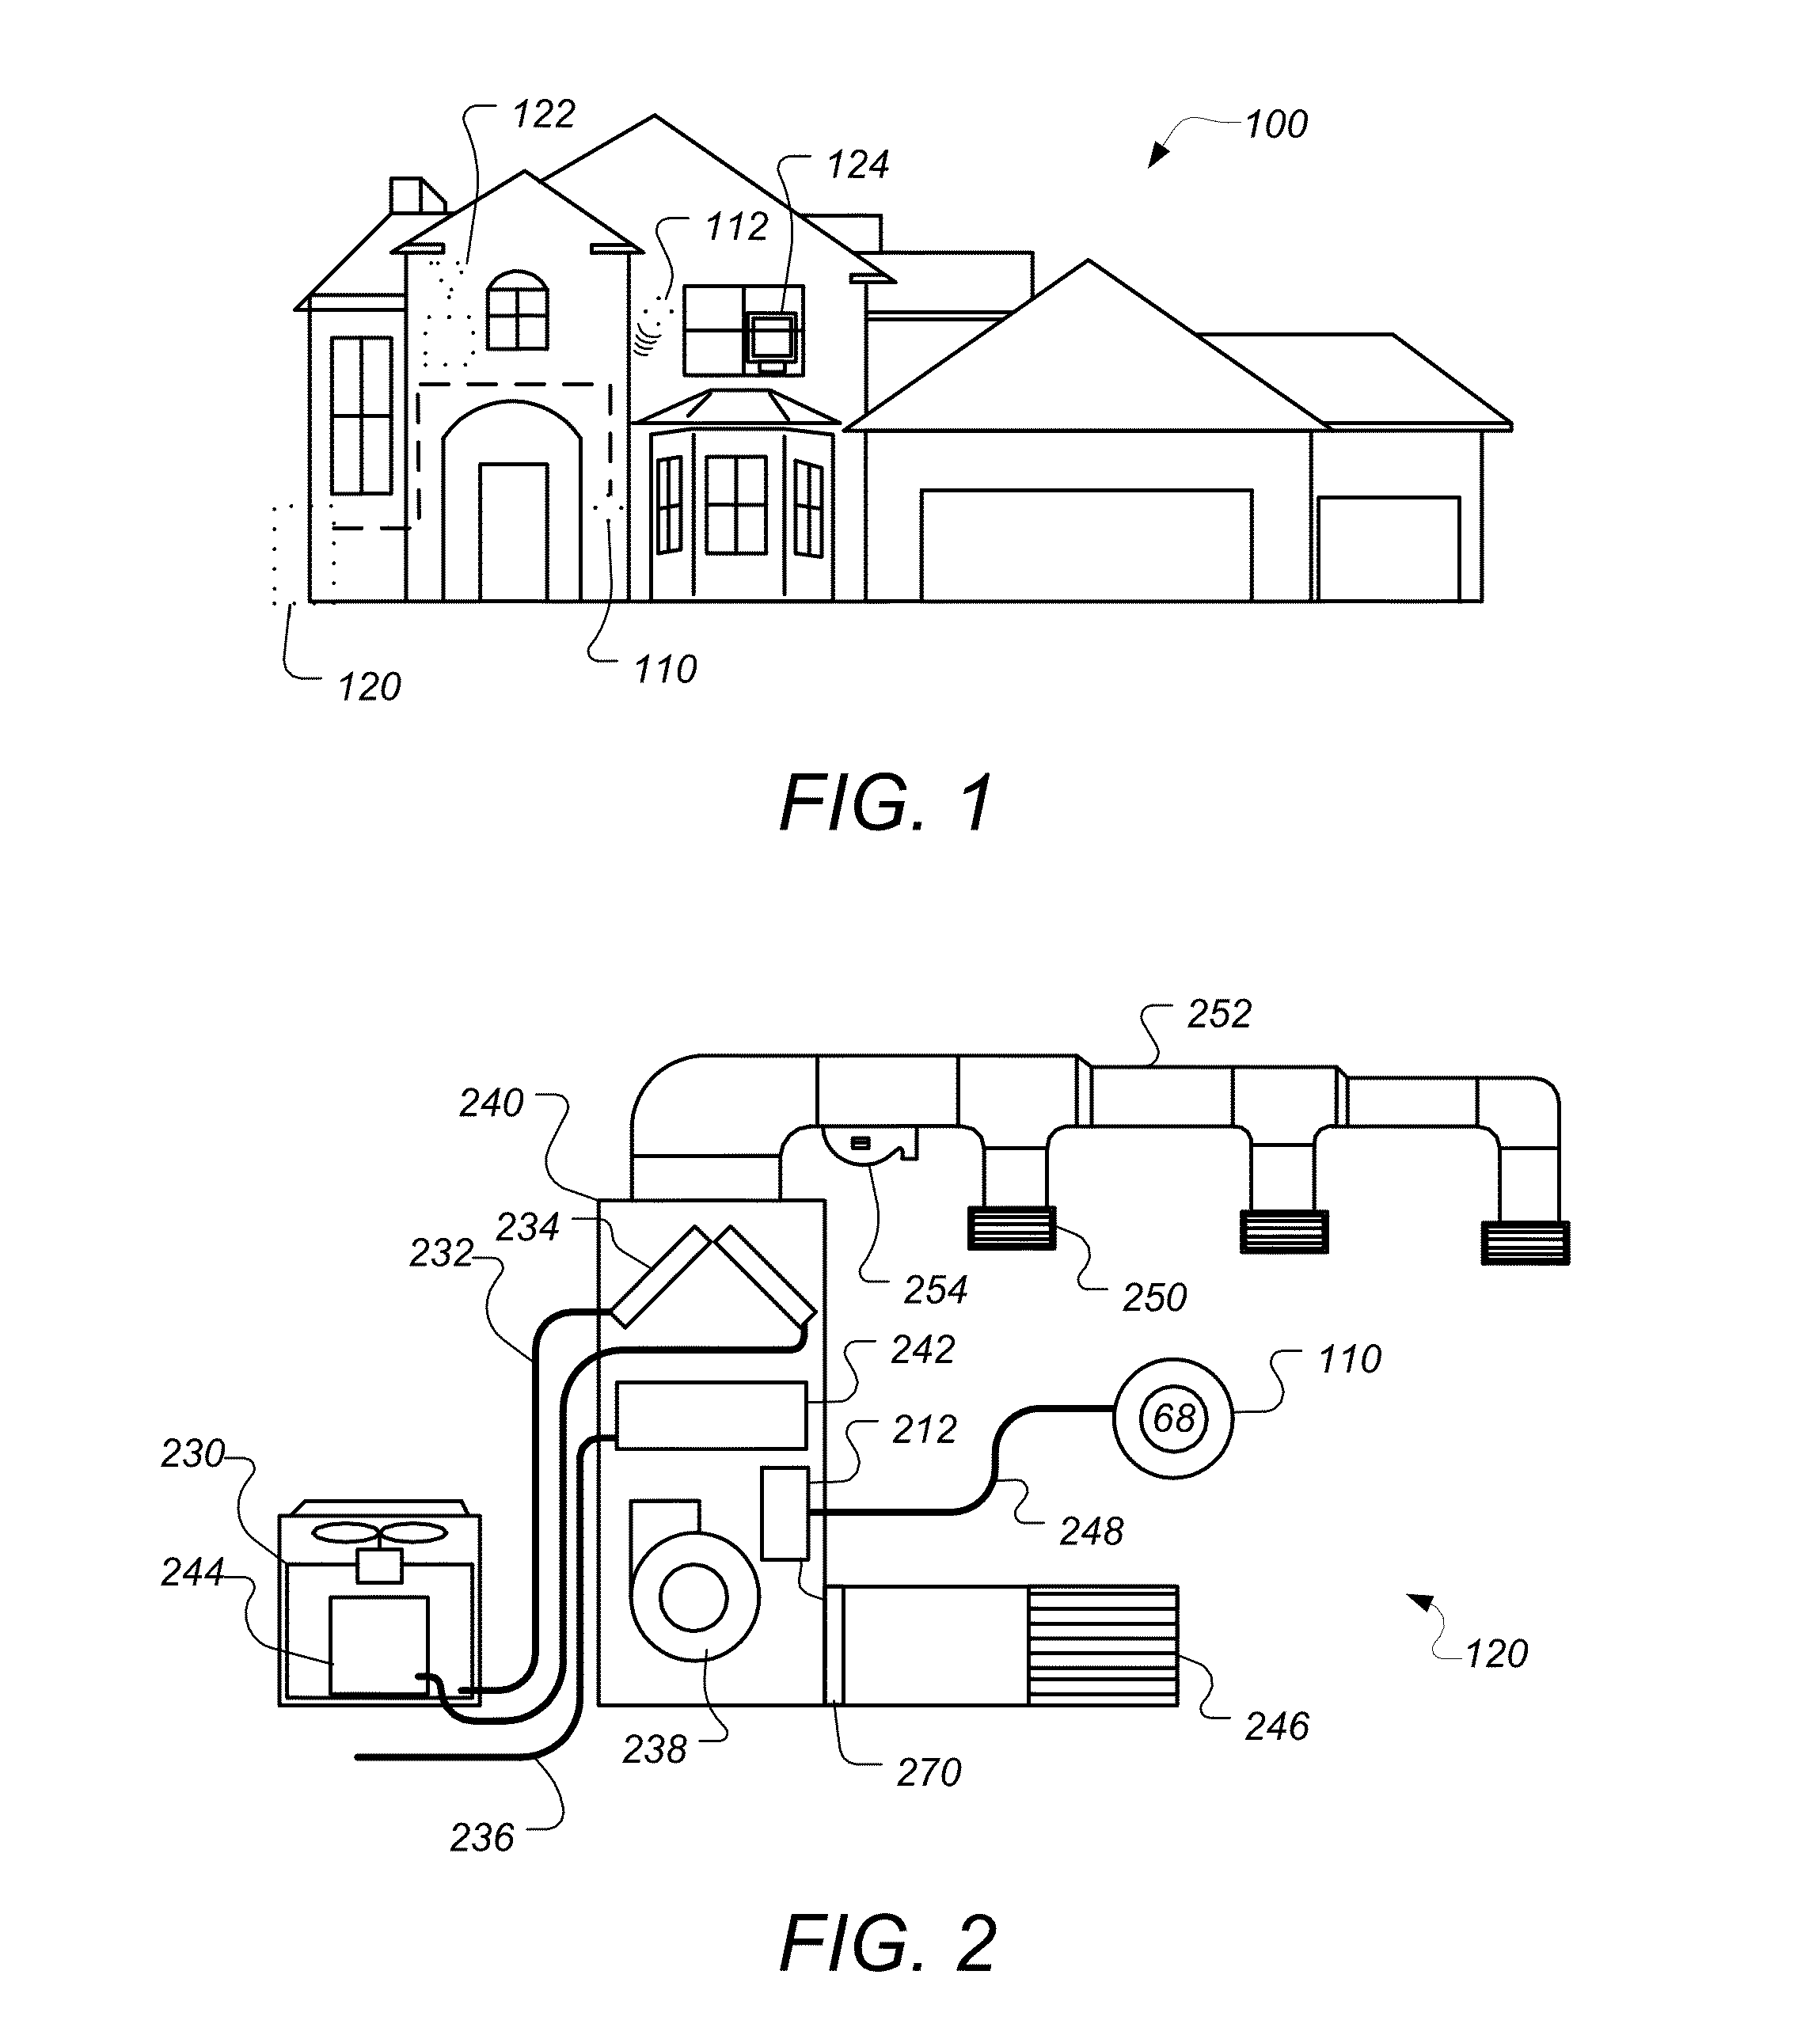 Radiant heating controls and methods for an environmental control system